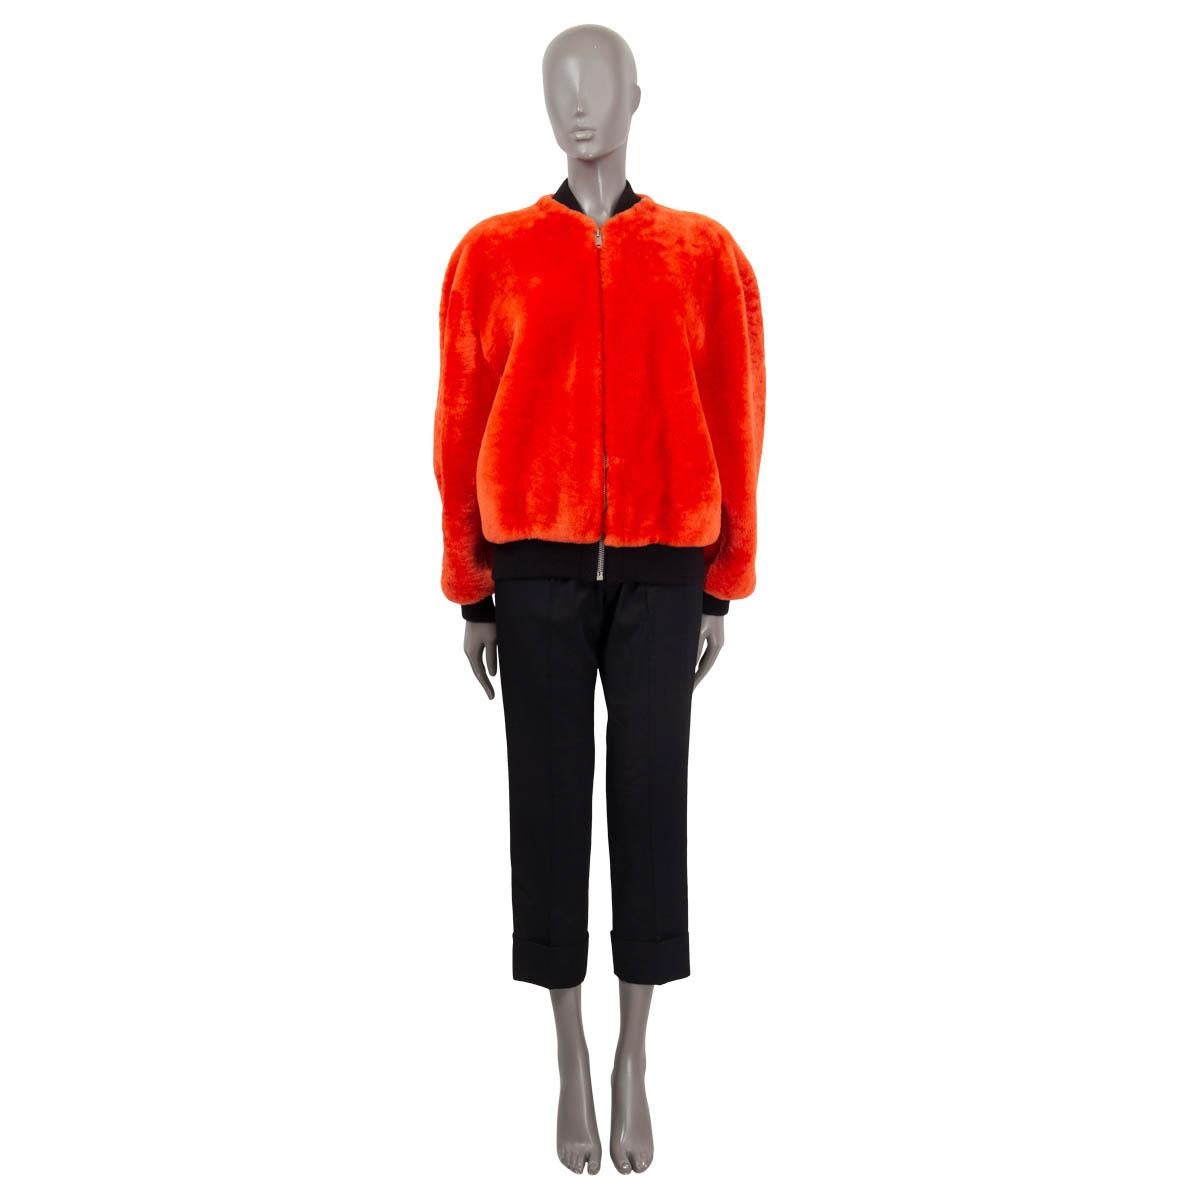 100% authentic Givenchy shearling bomber jacket in bright orange lambskin (100%). Features elastic cuffs, an elastic waistband and two slit pockets on the front. Opens with a zipper on the front. Semi-lined in viscose (57%) and polyester (43%).